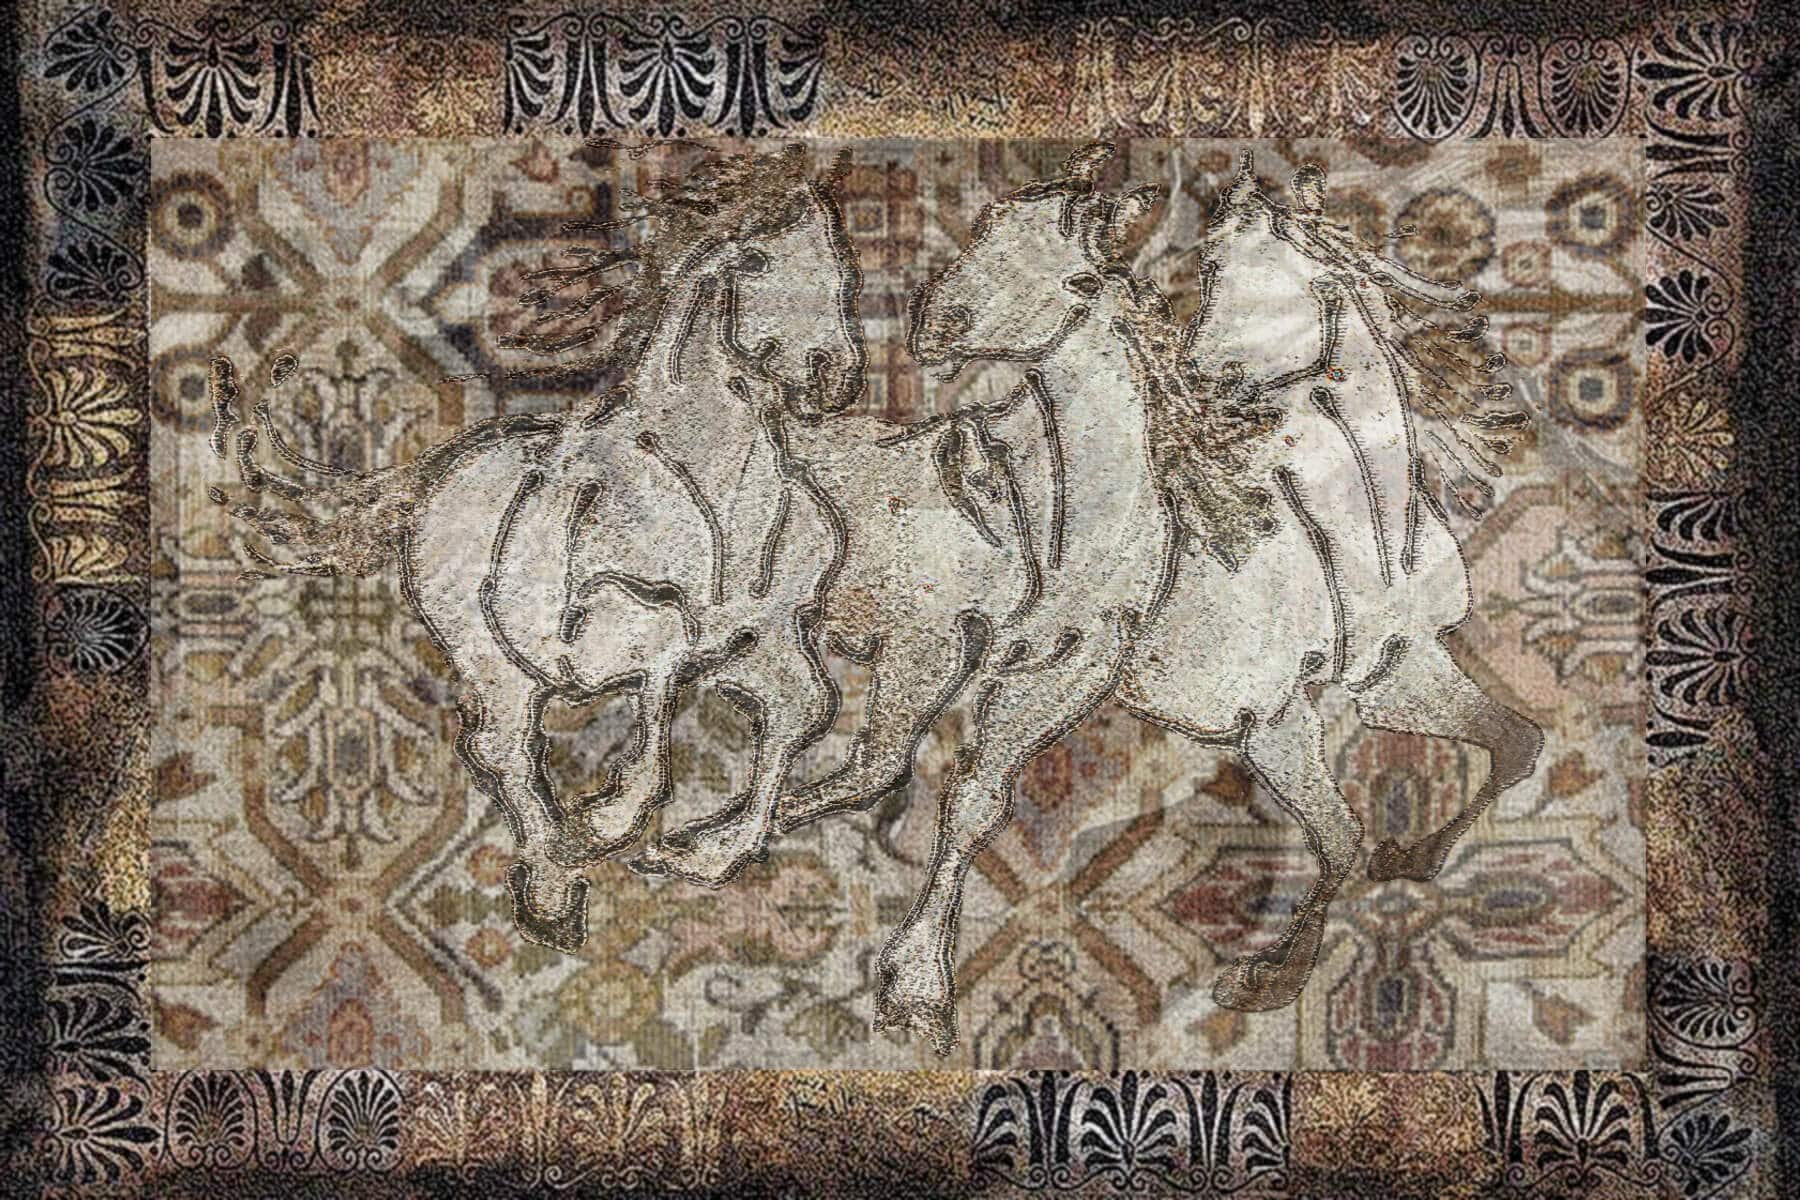 Running horses on a tapestry